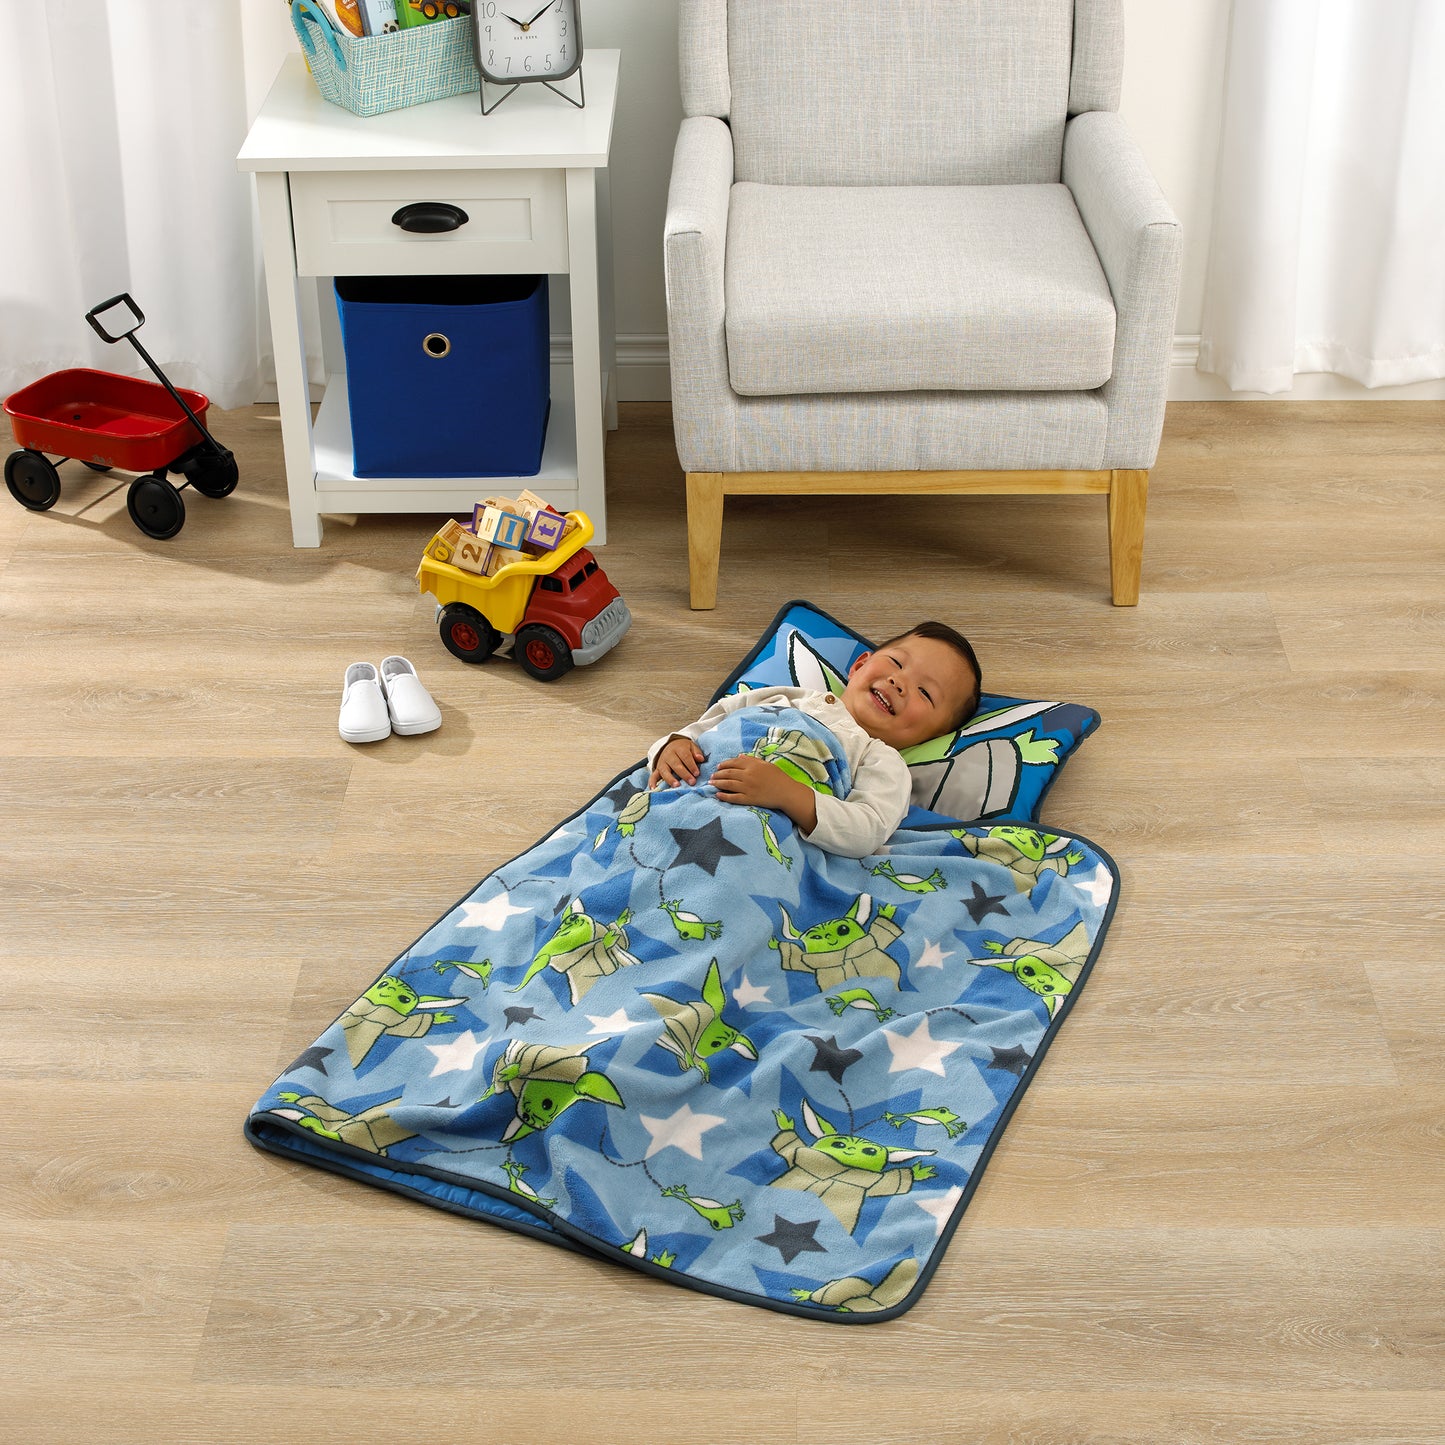 Star Wars The Child Cutest in the Galaxy Blue, Green and Gray Grogu, Hover Pod, and Stars Toddler Nap Mat